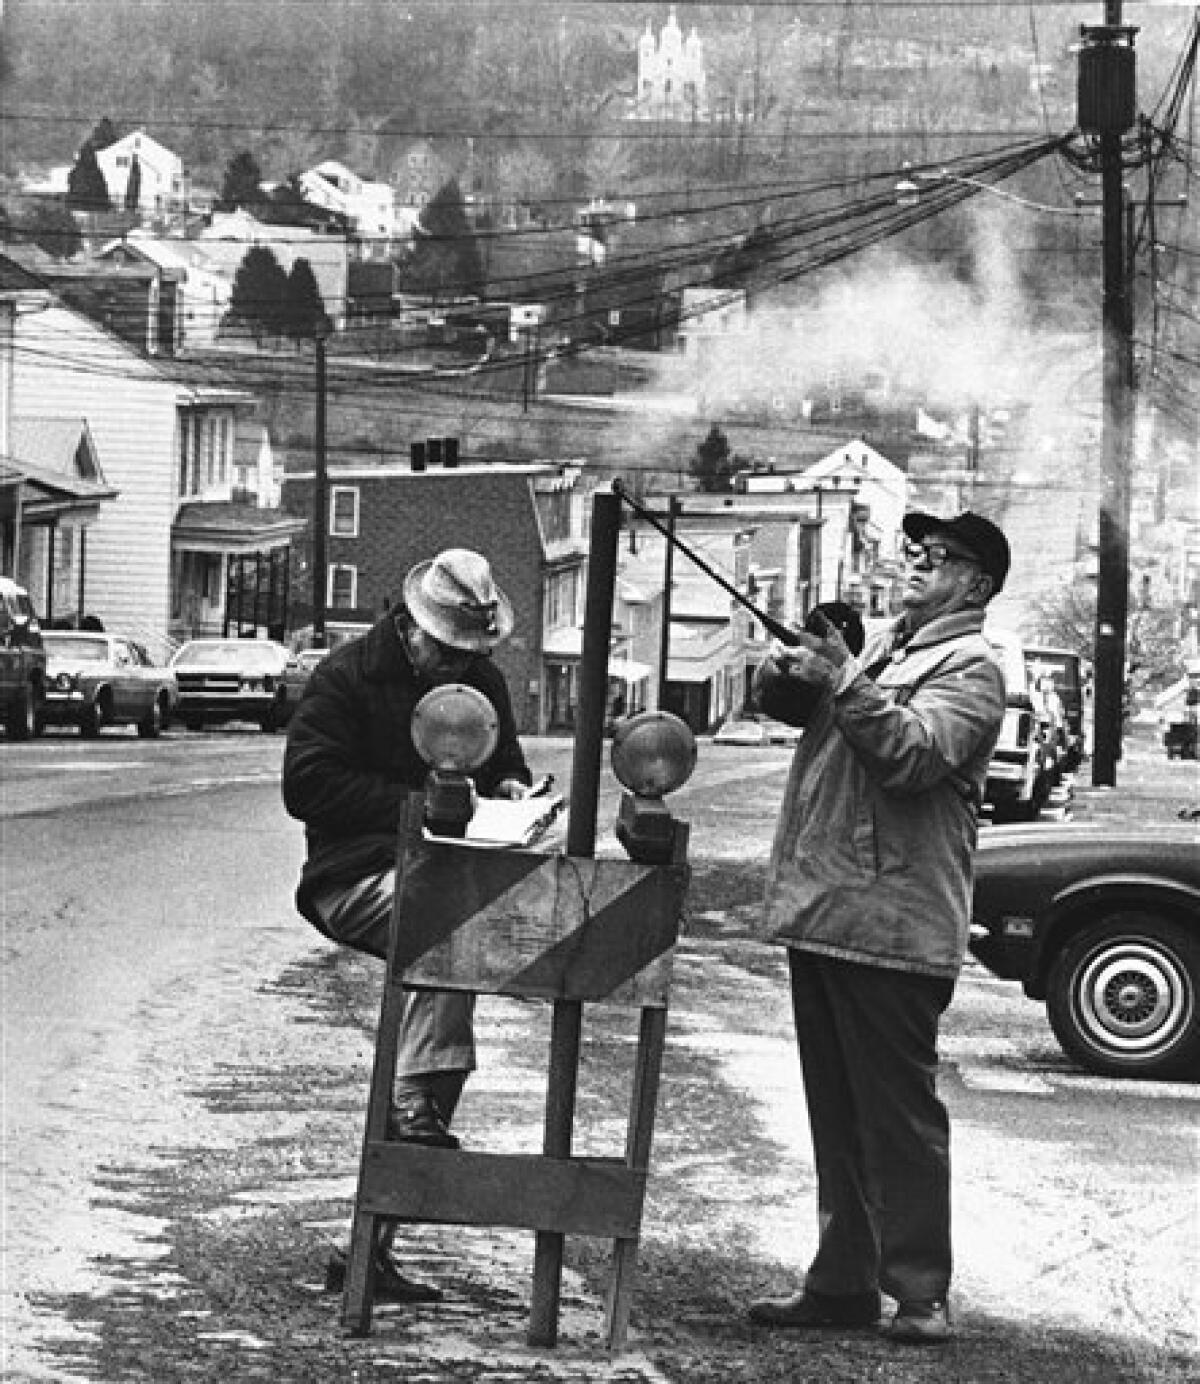 FILE - In this April 1981 file photo, U.S. Bureau of Mines' John Stockalis, right, and Dan Lewis drop a thermometer through a hole on Main Street in Centralia, Pa., to measure the heat from a shaft mine blaze that burns under the town. The few remaining residents of the Pennsylvania coal town decimated by a 48-year-old underground mine fire claim in court papers that a "massive fraud" is being perpetrated against Centralia by parties seeking to grab the mineral rights to hundreds of millions of dollars worth of coal. (AP Photo/Paul Vathis, File)